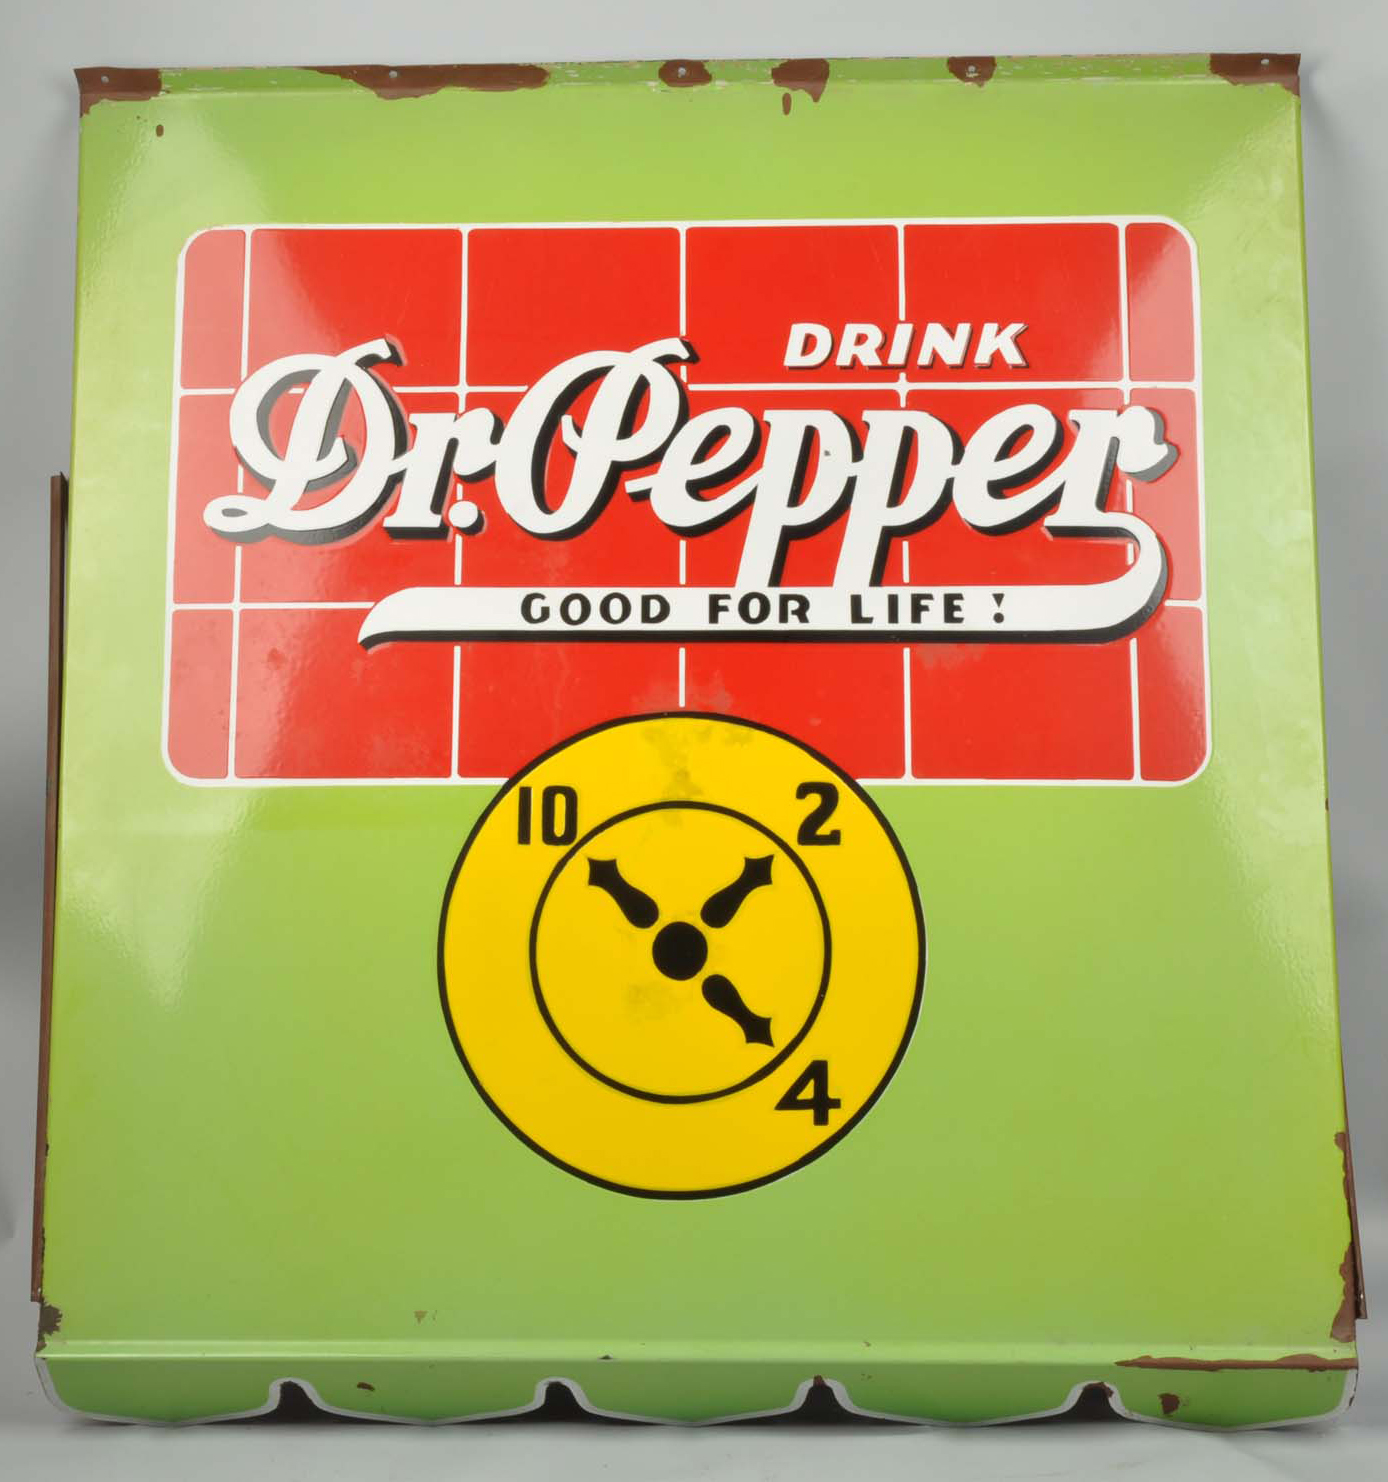 Dr. Pepper porcelain awning sign, 46 x 42 inches, est. $6,000-$9,000. Morphy Auctions image